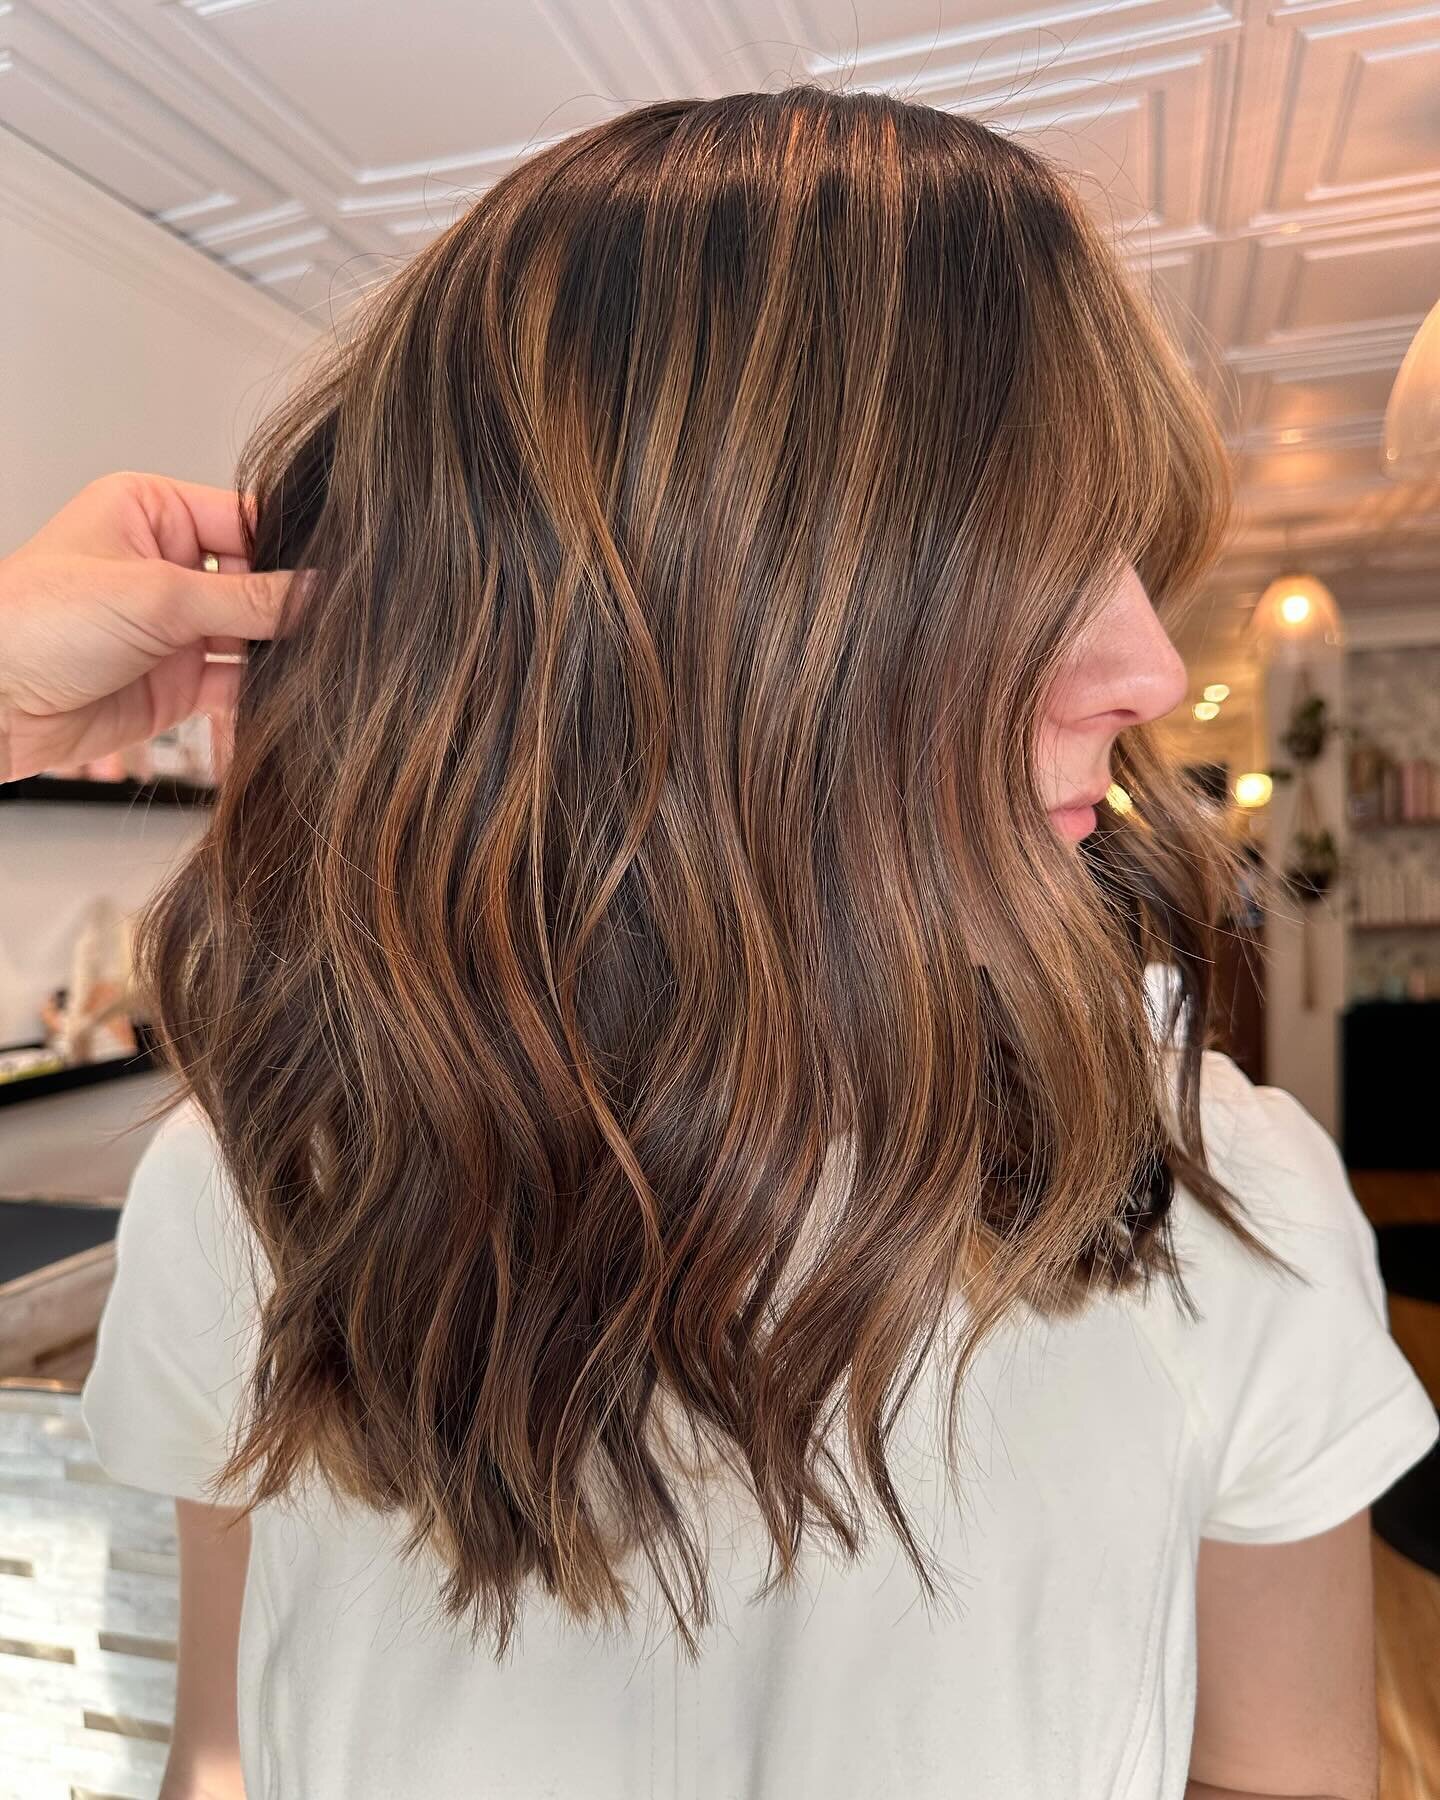 Georgy&rsquo;s warm dimensional brunette is screaming spring! 🌷We&rsquo;ll be starting April off with some Beyonc&eacute; for are #musicpick #thisweekatmirrorandmantel 

#georgymirrorandmantel #warmtonehighlights #dinensionalbrunette #mirrorandmante